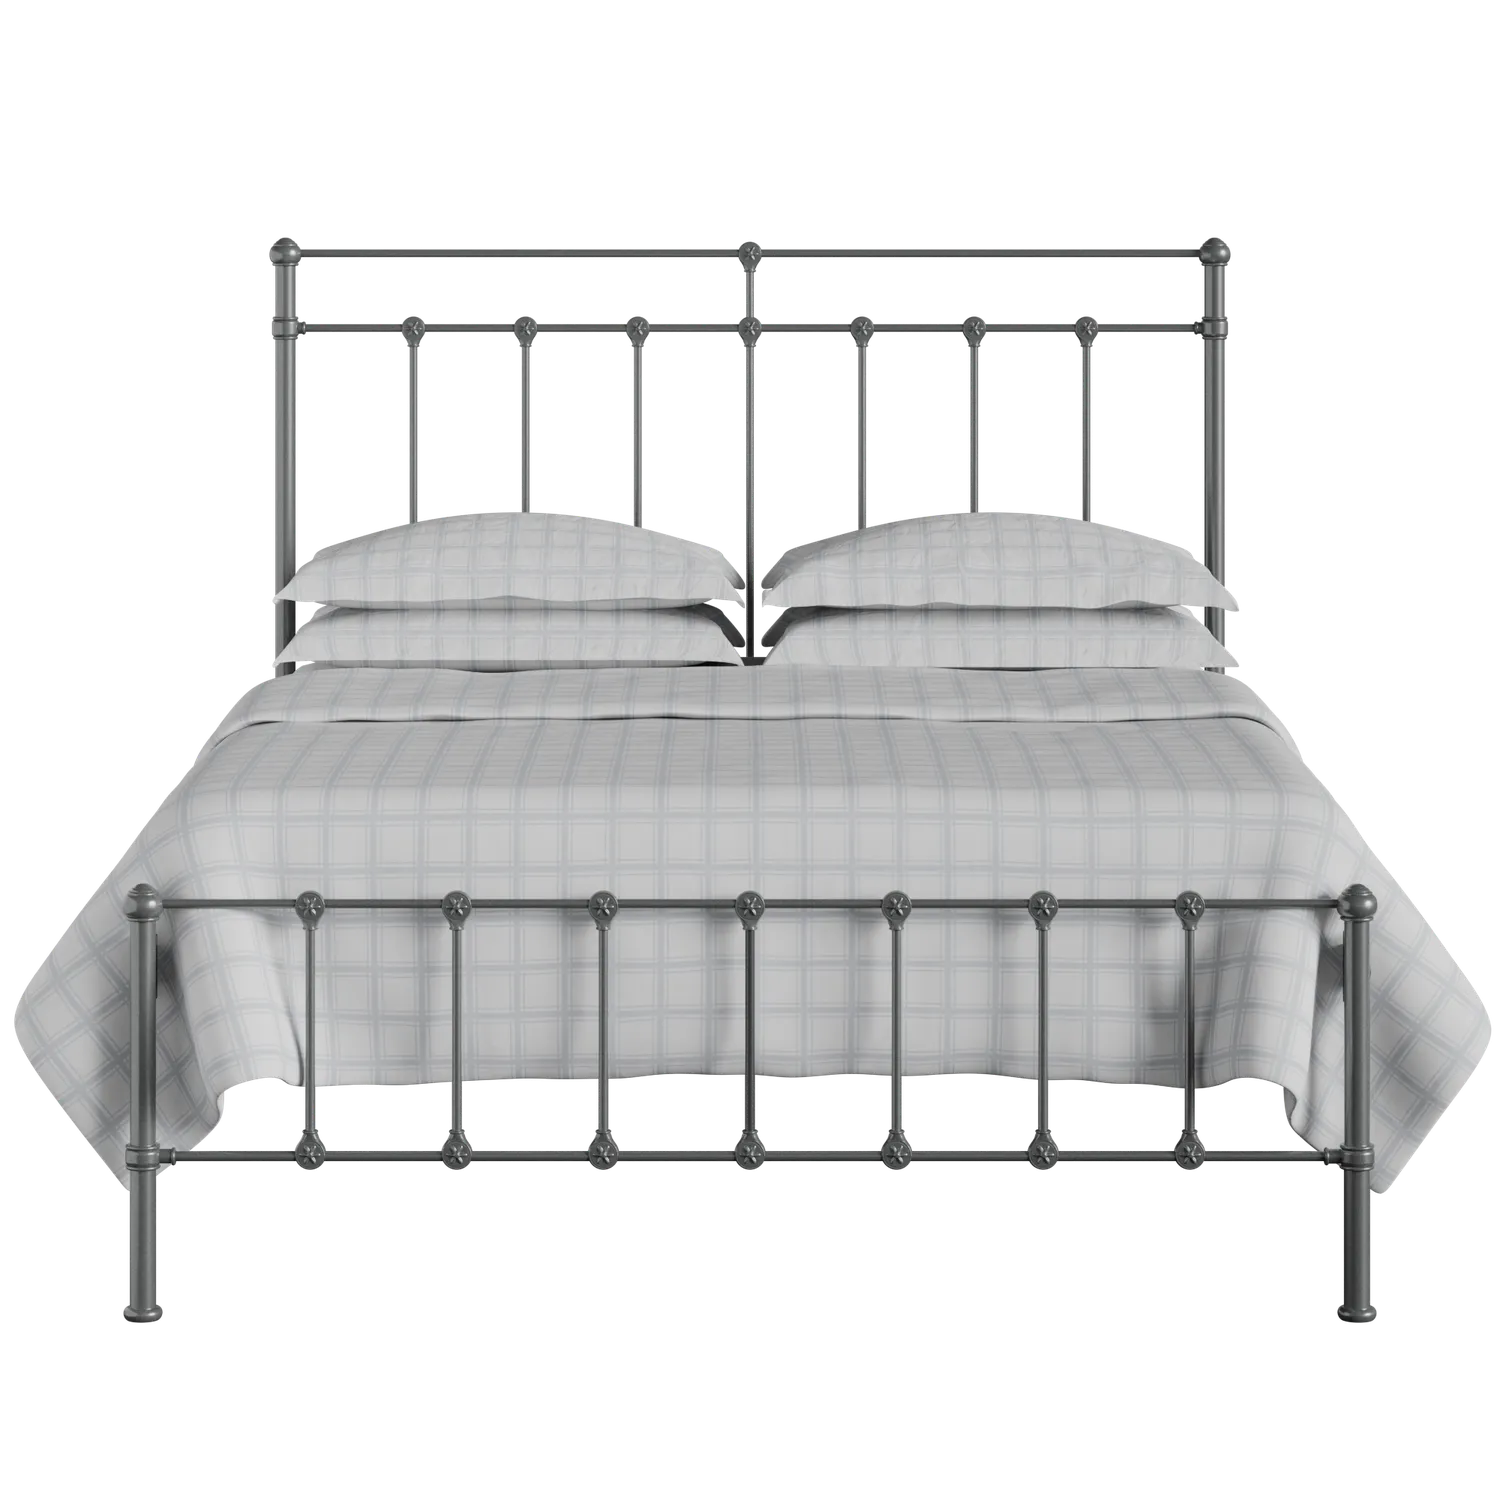 Ashley iron/metal bed in pewter